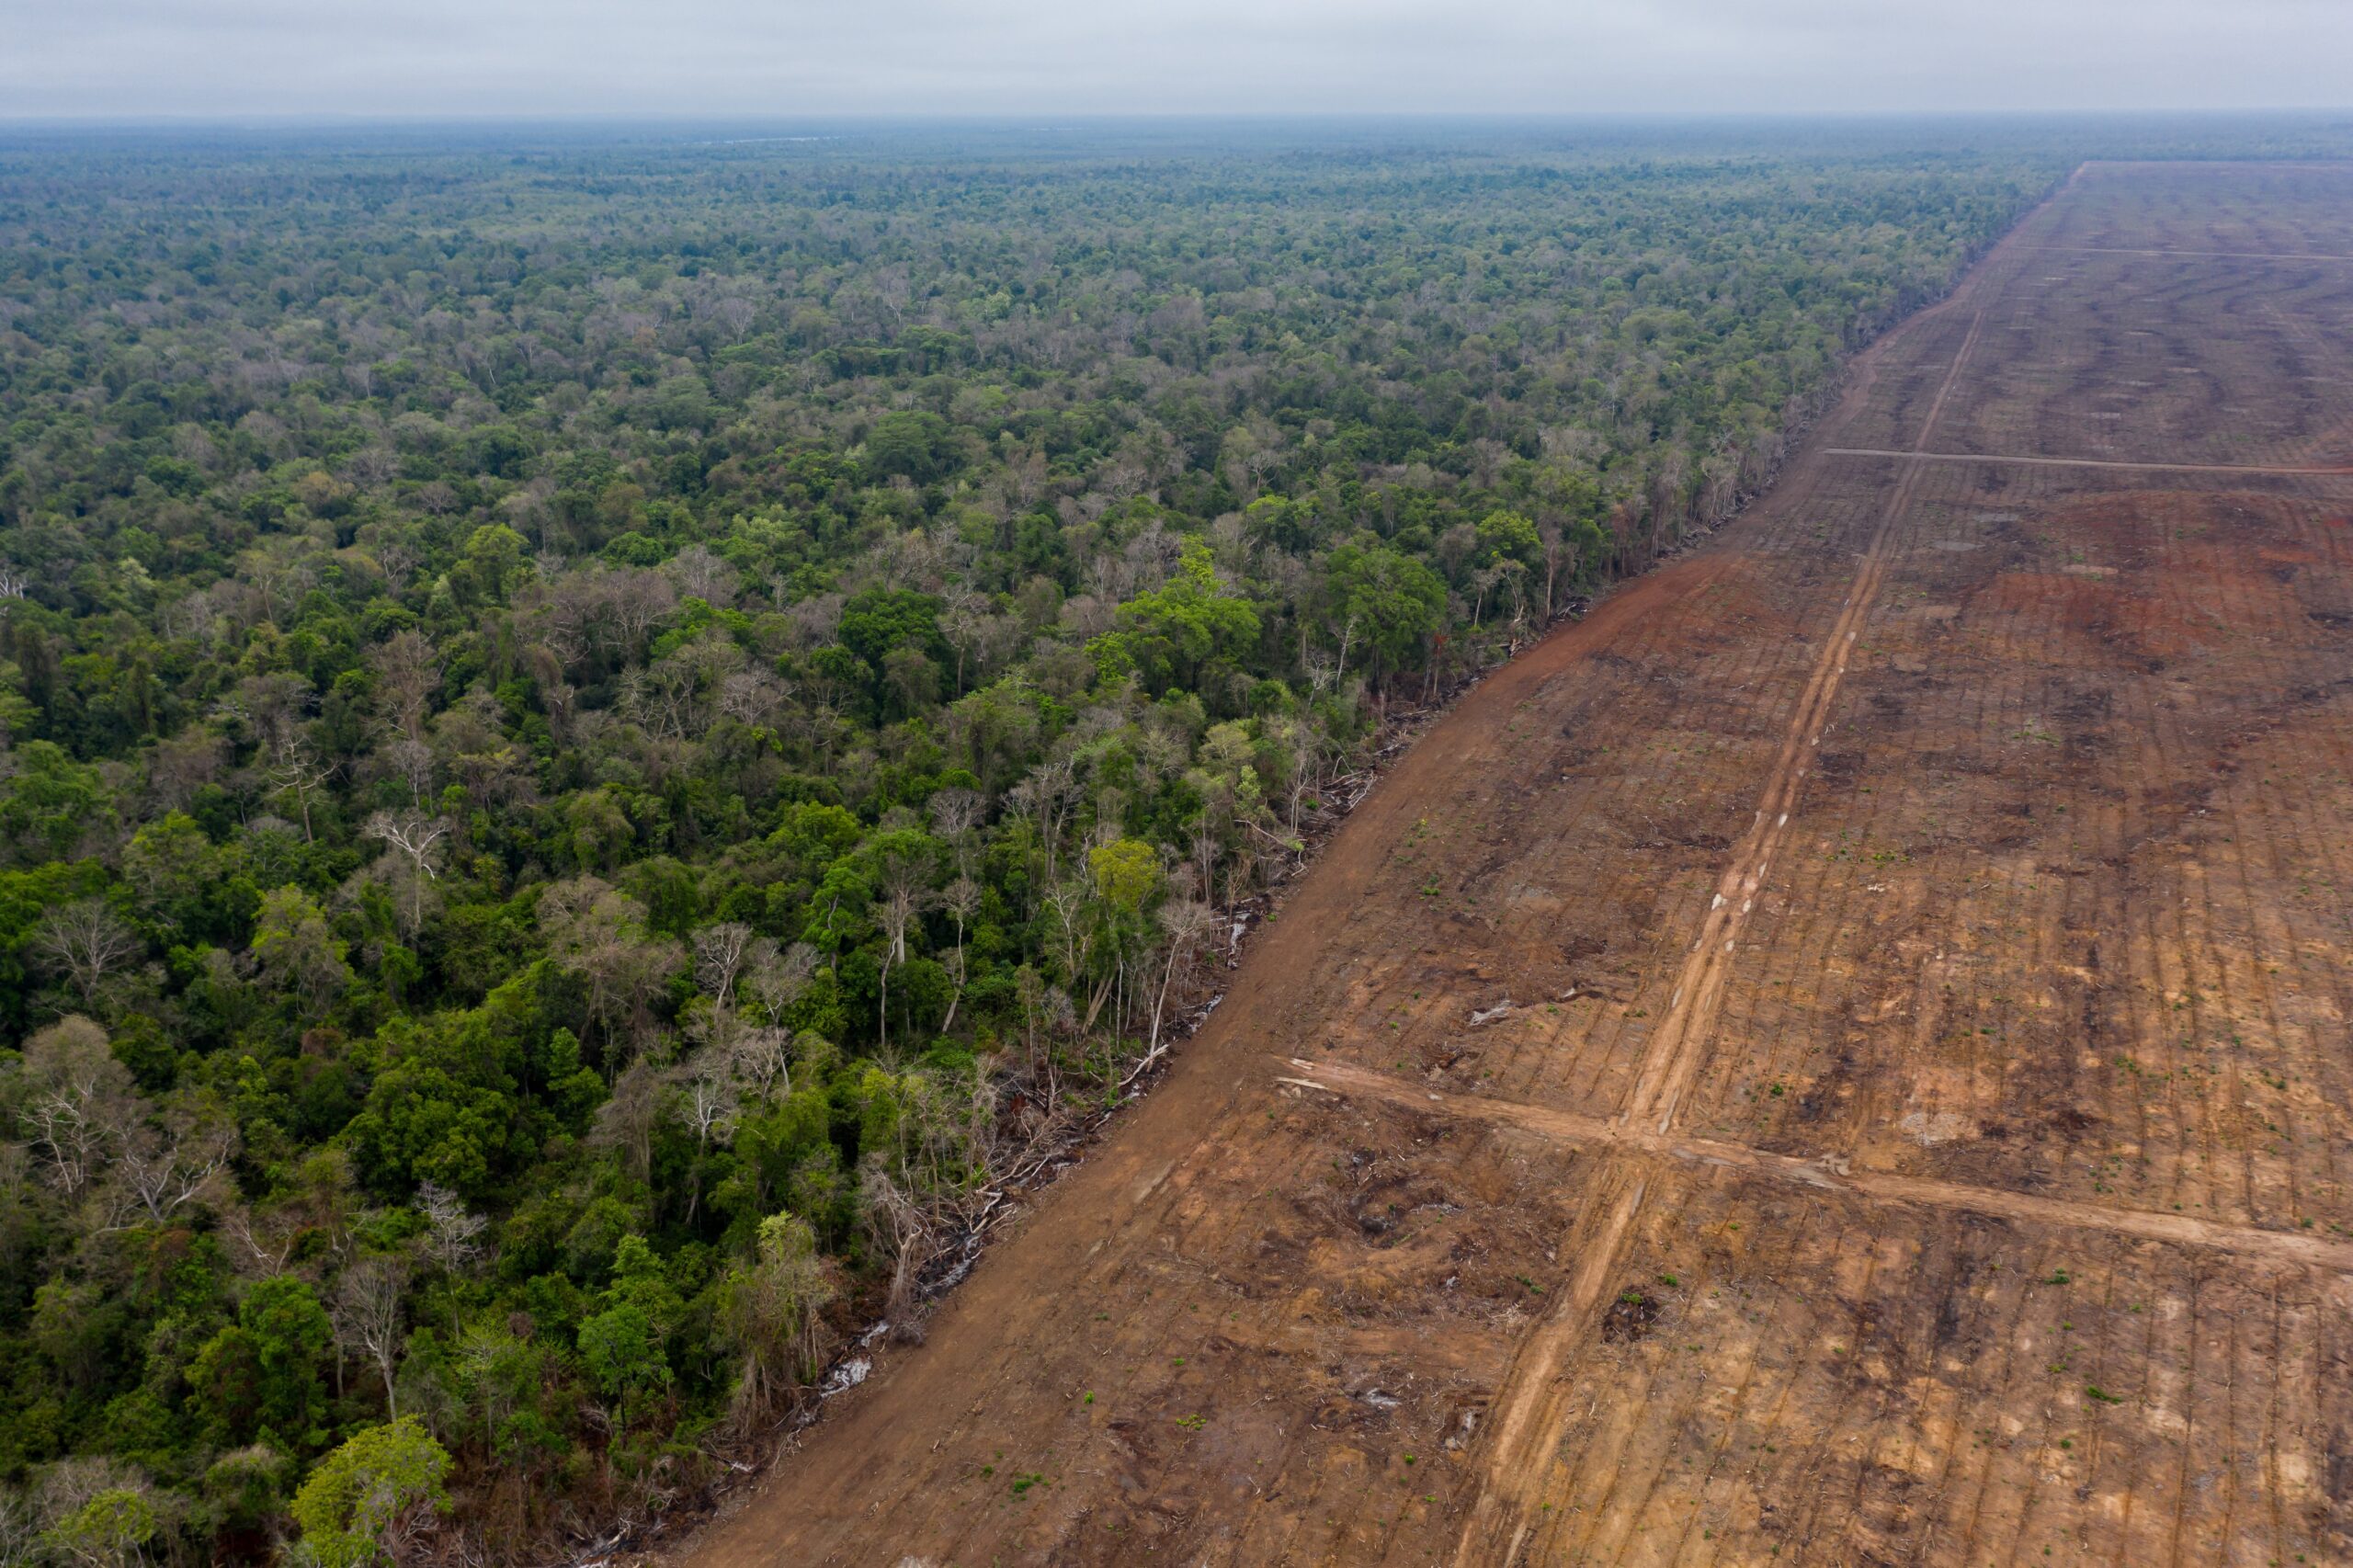 An aerial view of forest clearing inside Think Biotech’s 34,000-hectare concession that was granted in 2012 along along the eastern boundary Prey Lang Wildlife Sanctuary. Despite being a reforestation project on paper, Think Biotech has repeatedly faced allegations of trespass logging inside the protected area its concession borders. Image by Andy Ball / Mongabay.